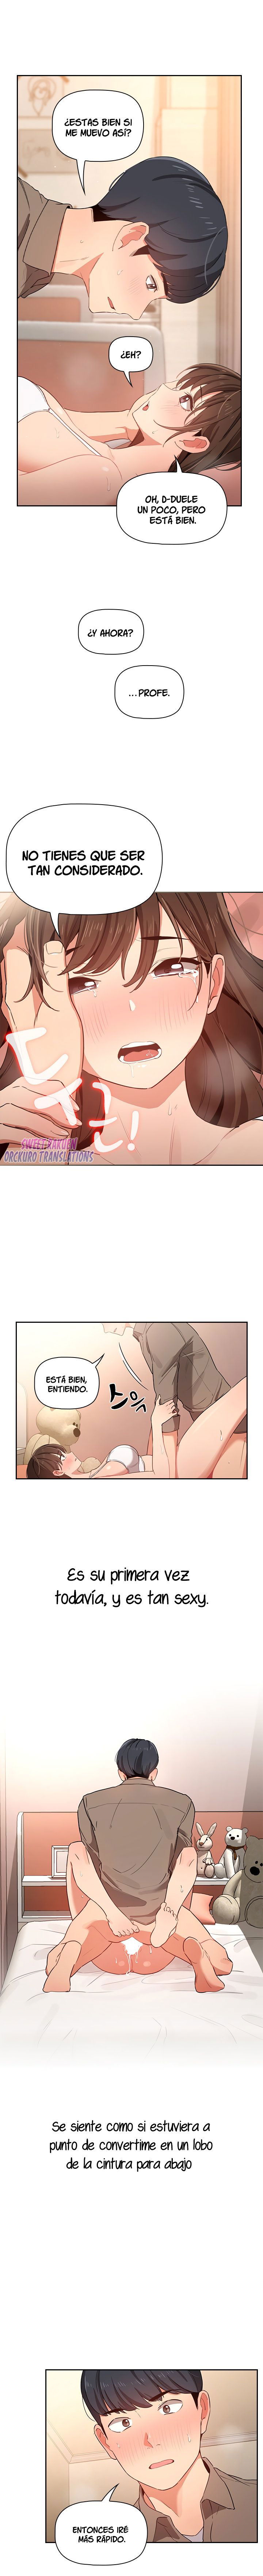 private-tutoring-in-pandemic-raw-chap-7-8